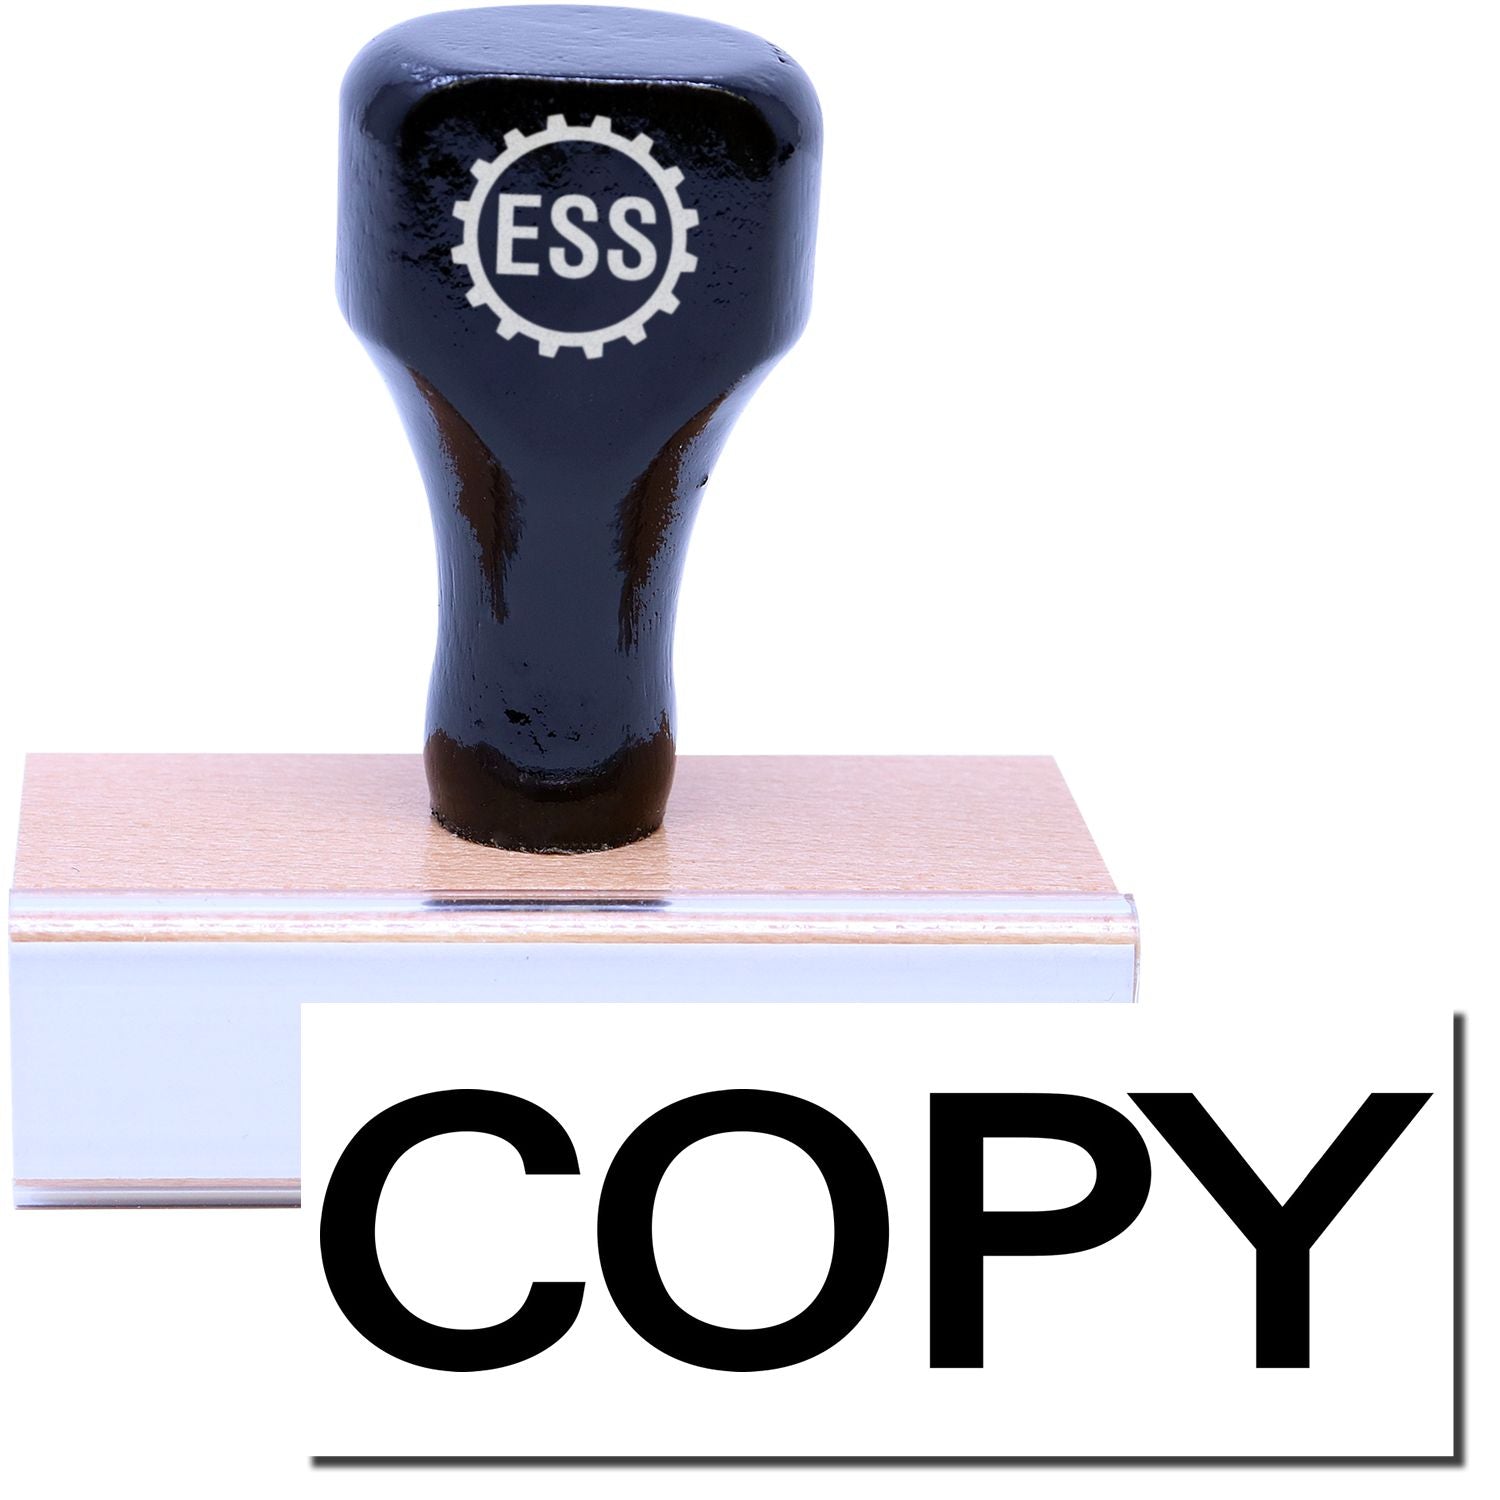 A stock office rubber stamp with a stamped image showing how the text "COPY" in bold font is displayed after stamping.